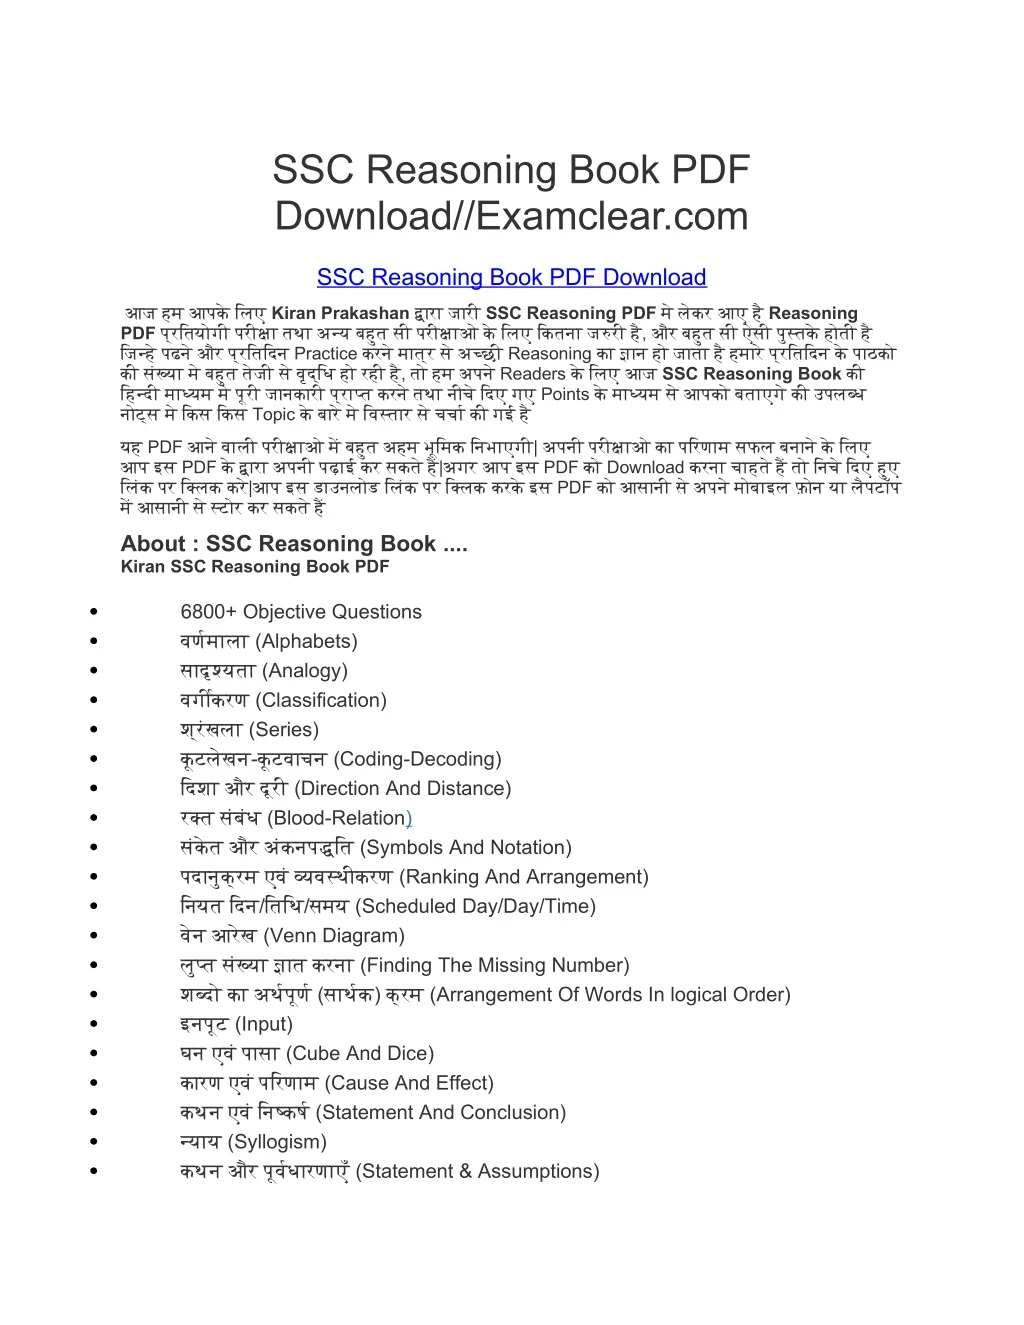 ssc reasoning book pdf download examclear com